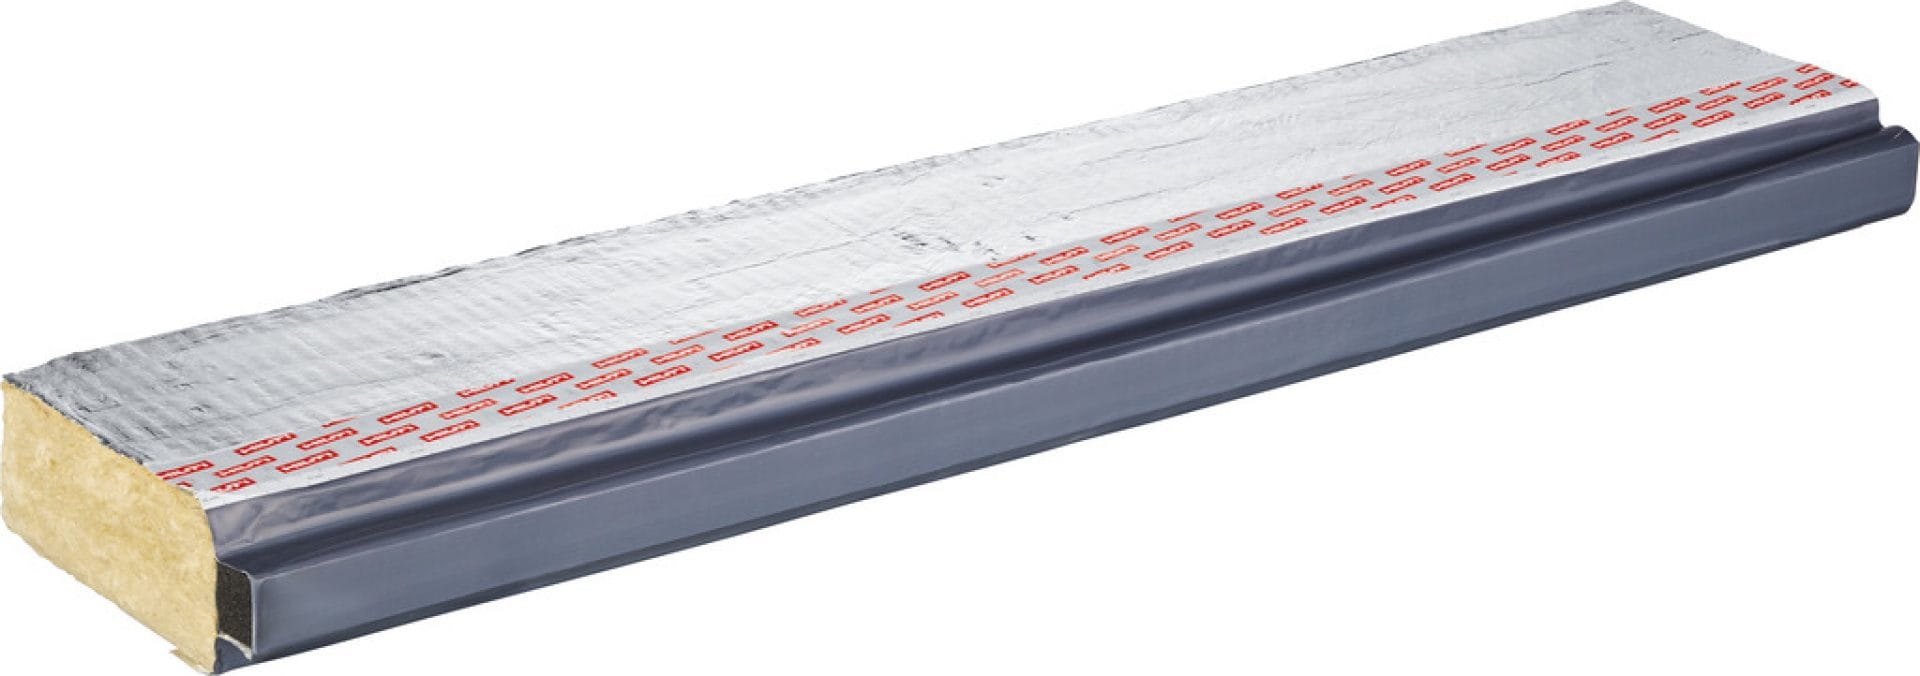 CP 674 NV Fire cavity barrier (non-ventilated)